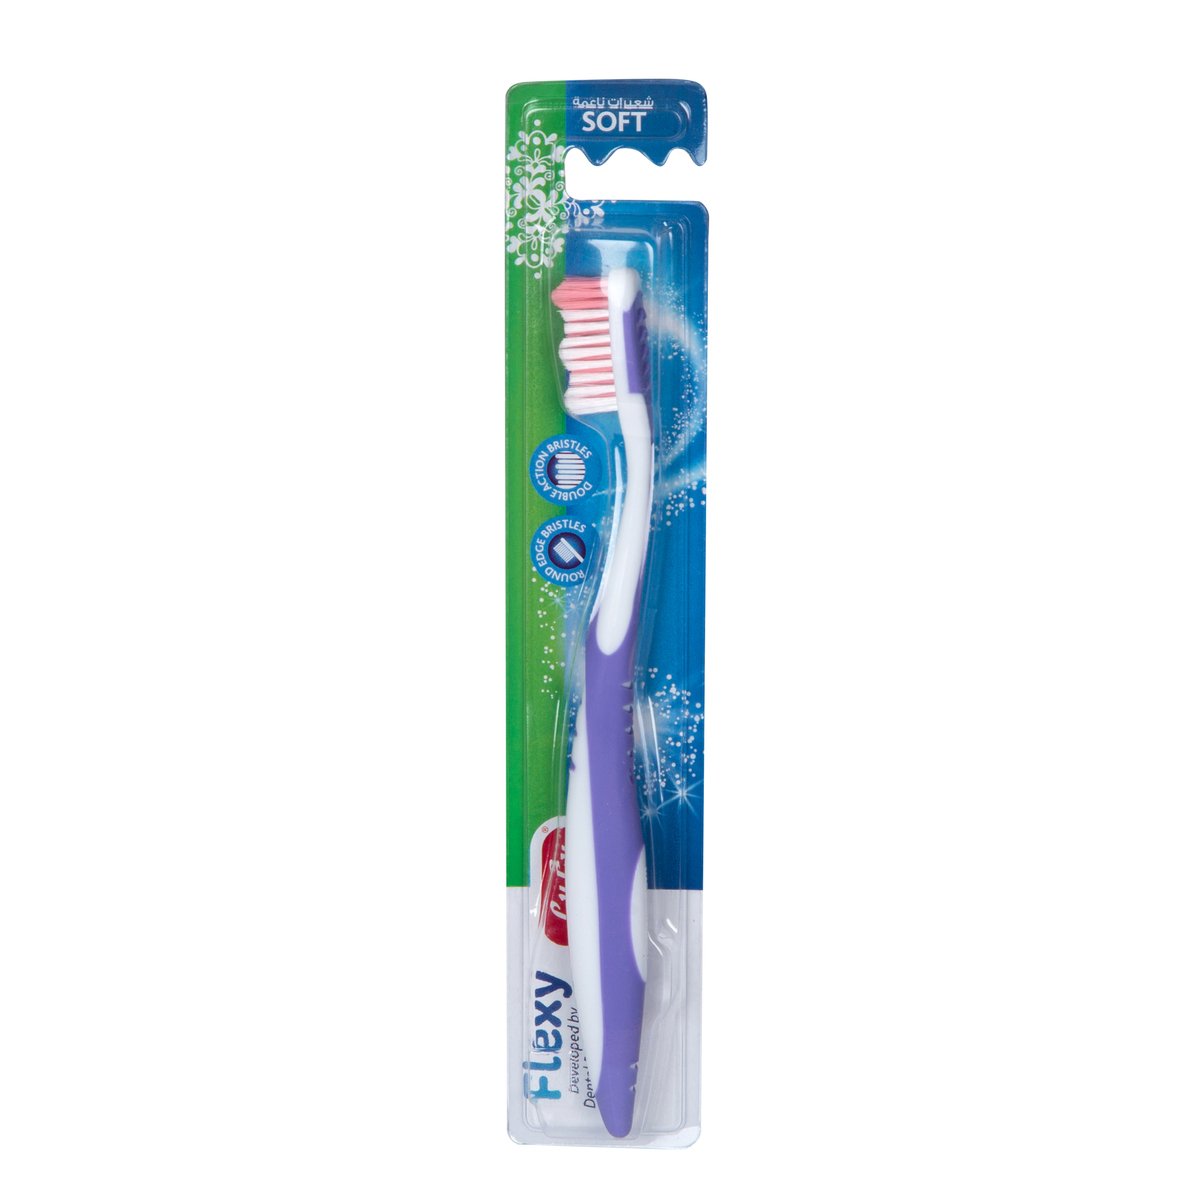 LuLu Toothbrush Flexi Soft Assorted Color 1 pc